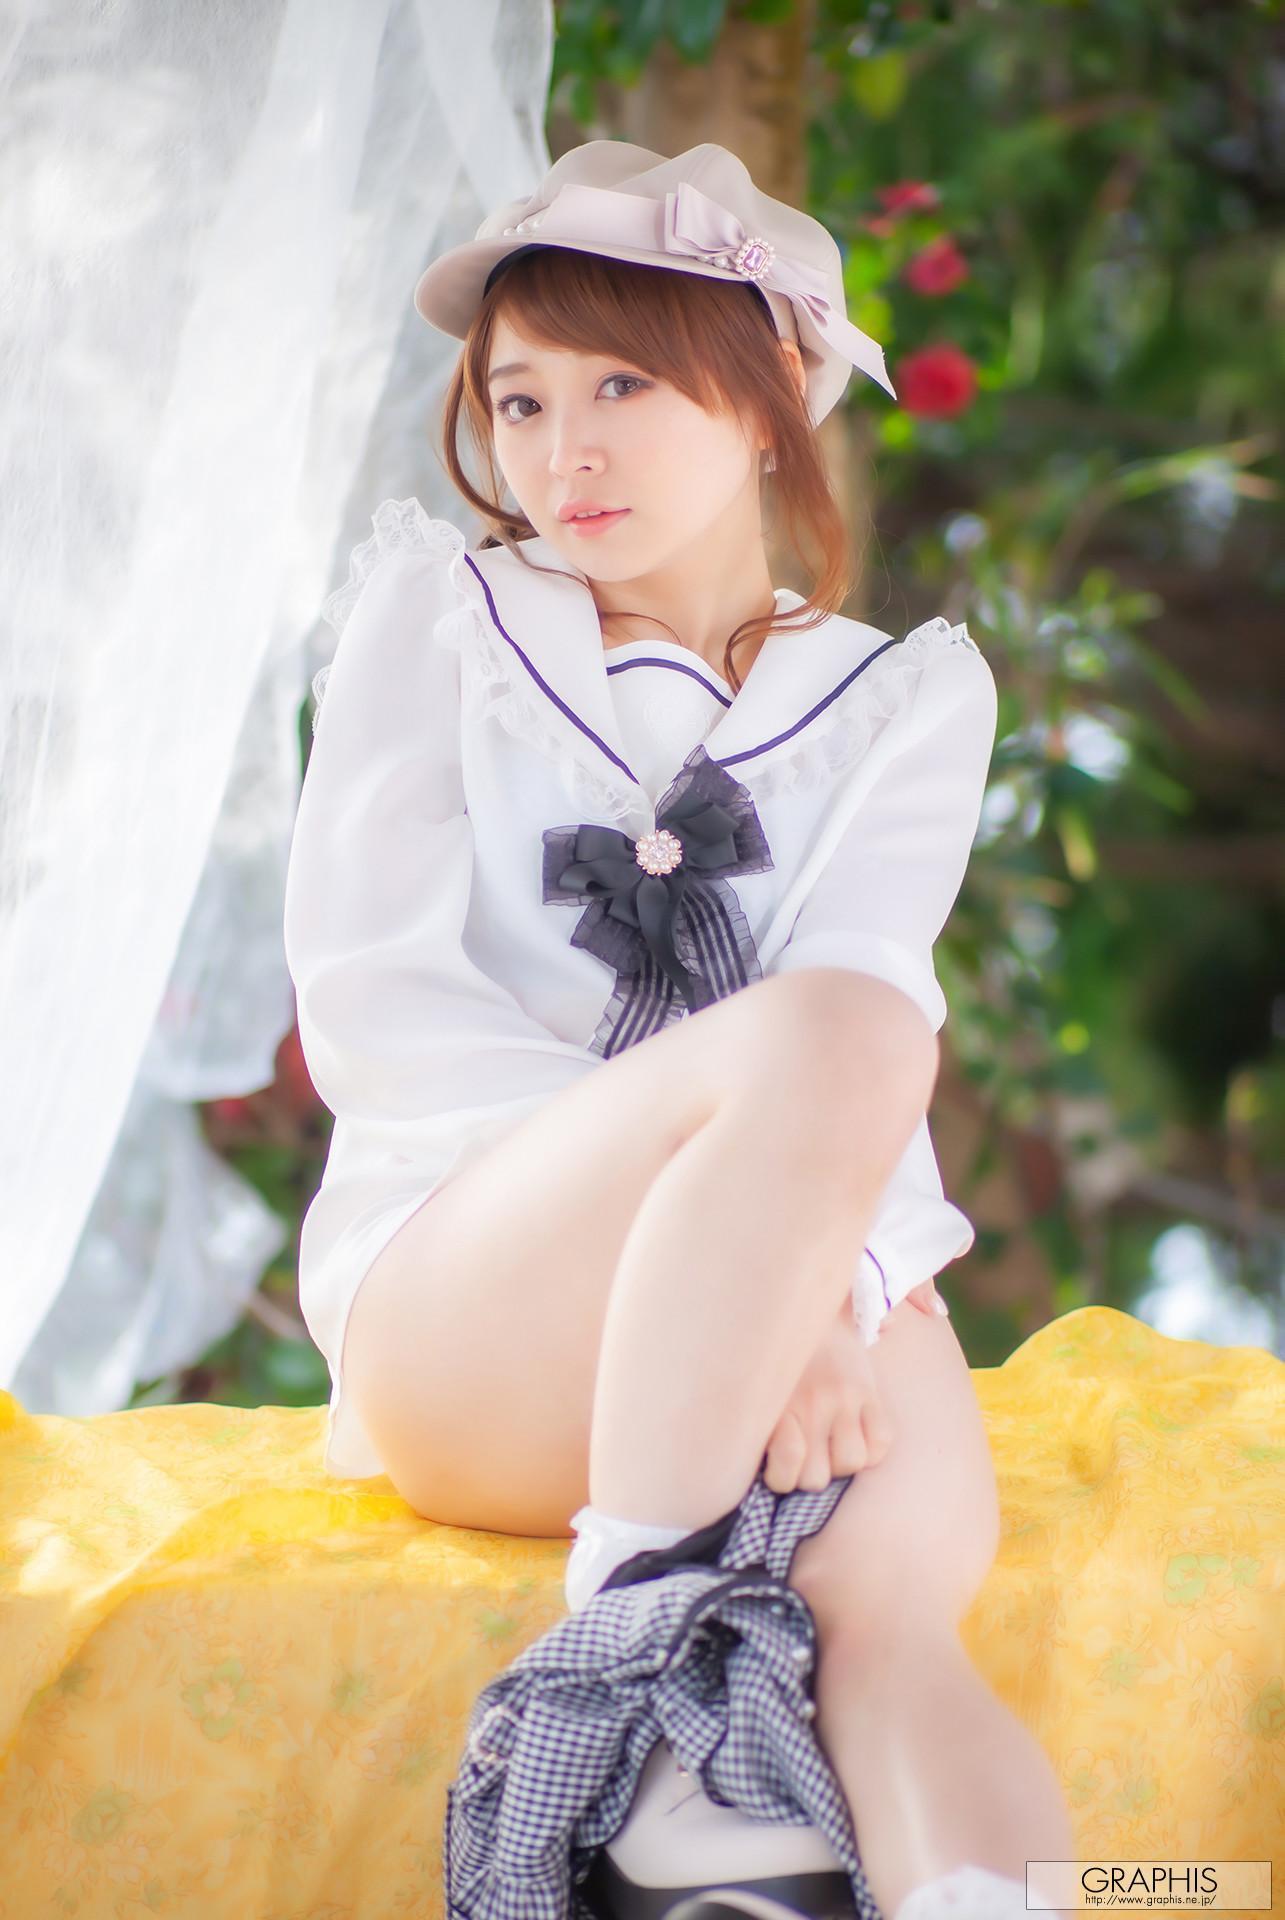 Alice Shiina 椎菜アリス, [Graphis] SPRING SPECIAL 2023 「Love me do !」 Vol.03(6)